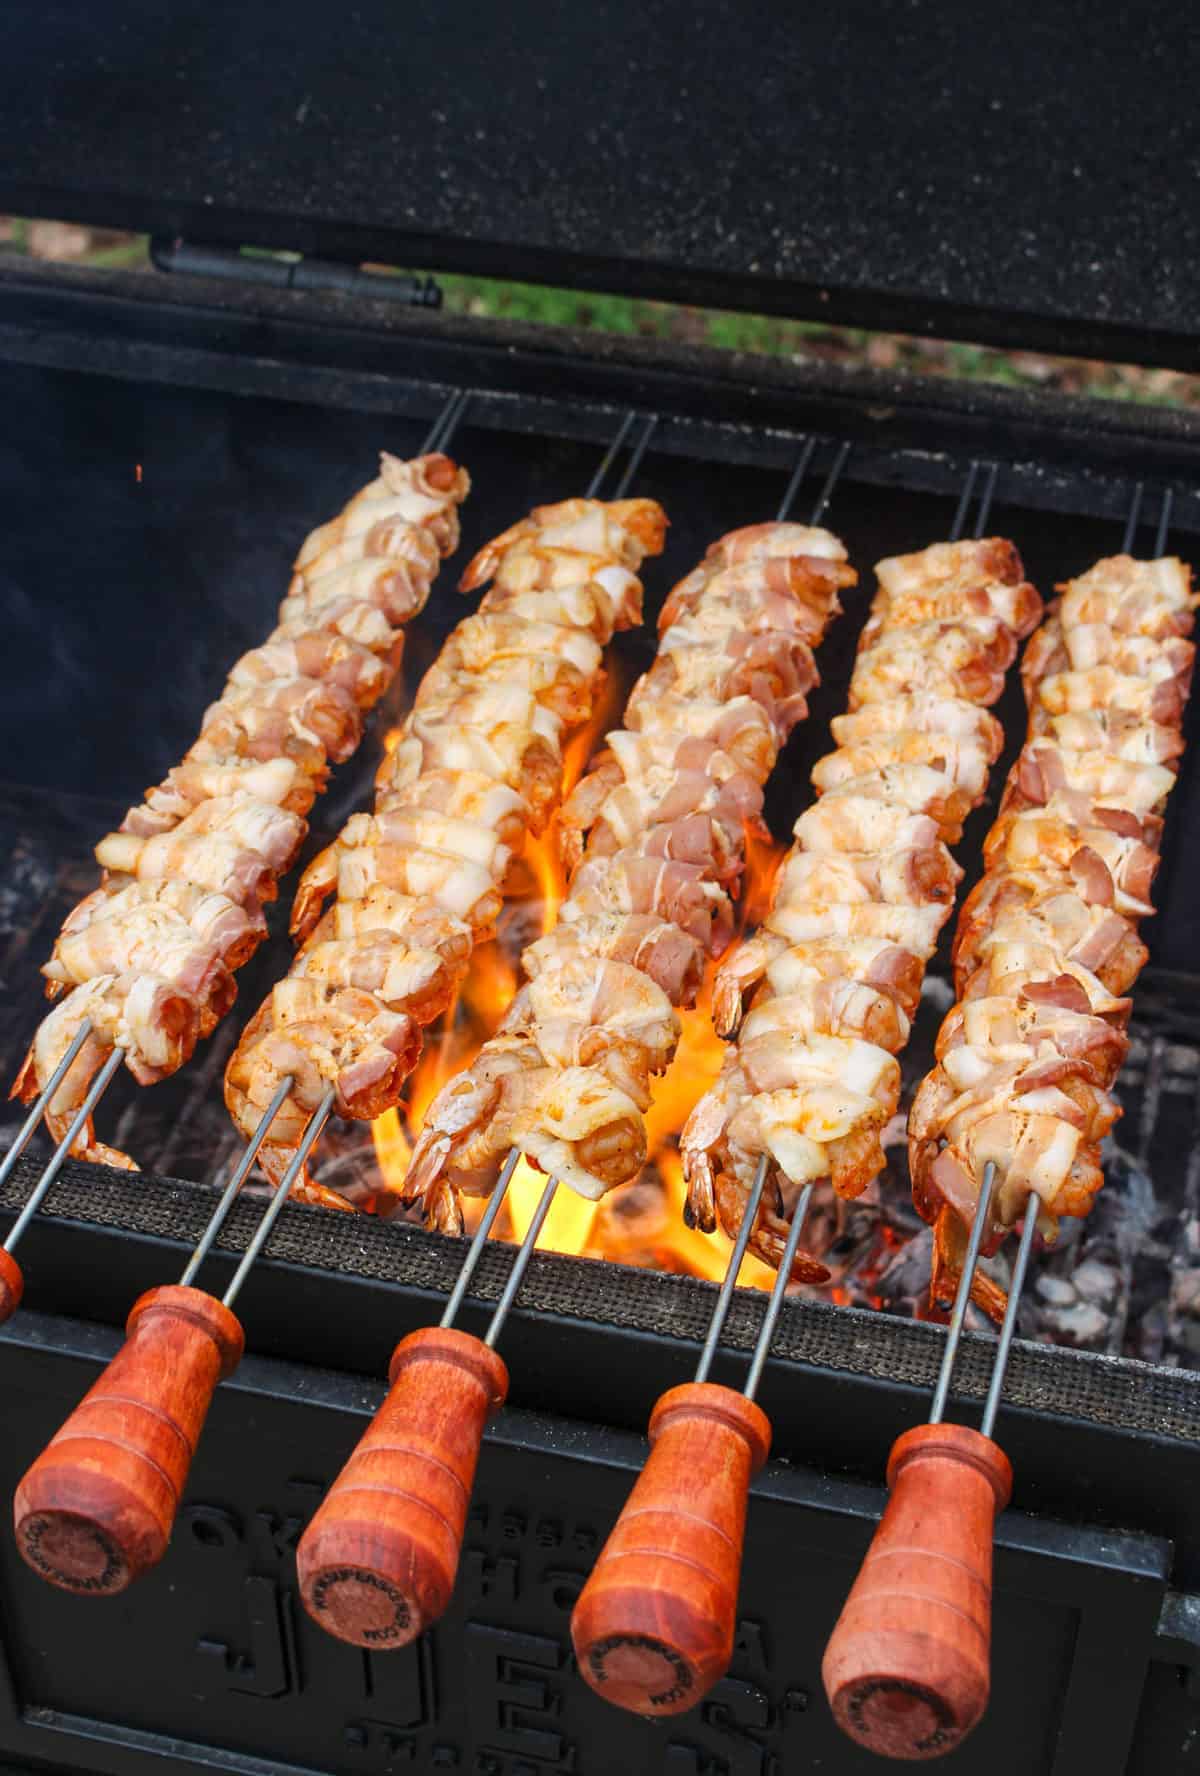 Bacon wrapped shrimp on skewers